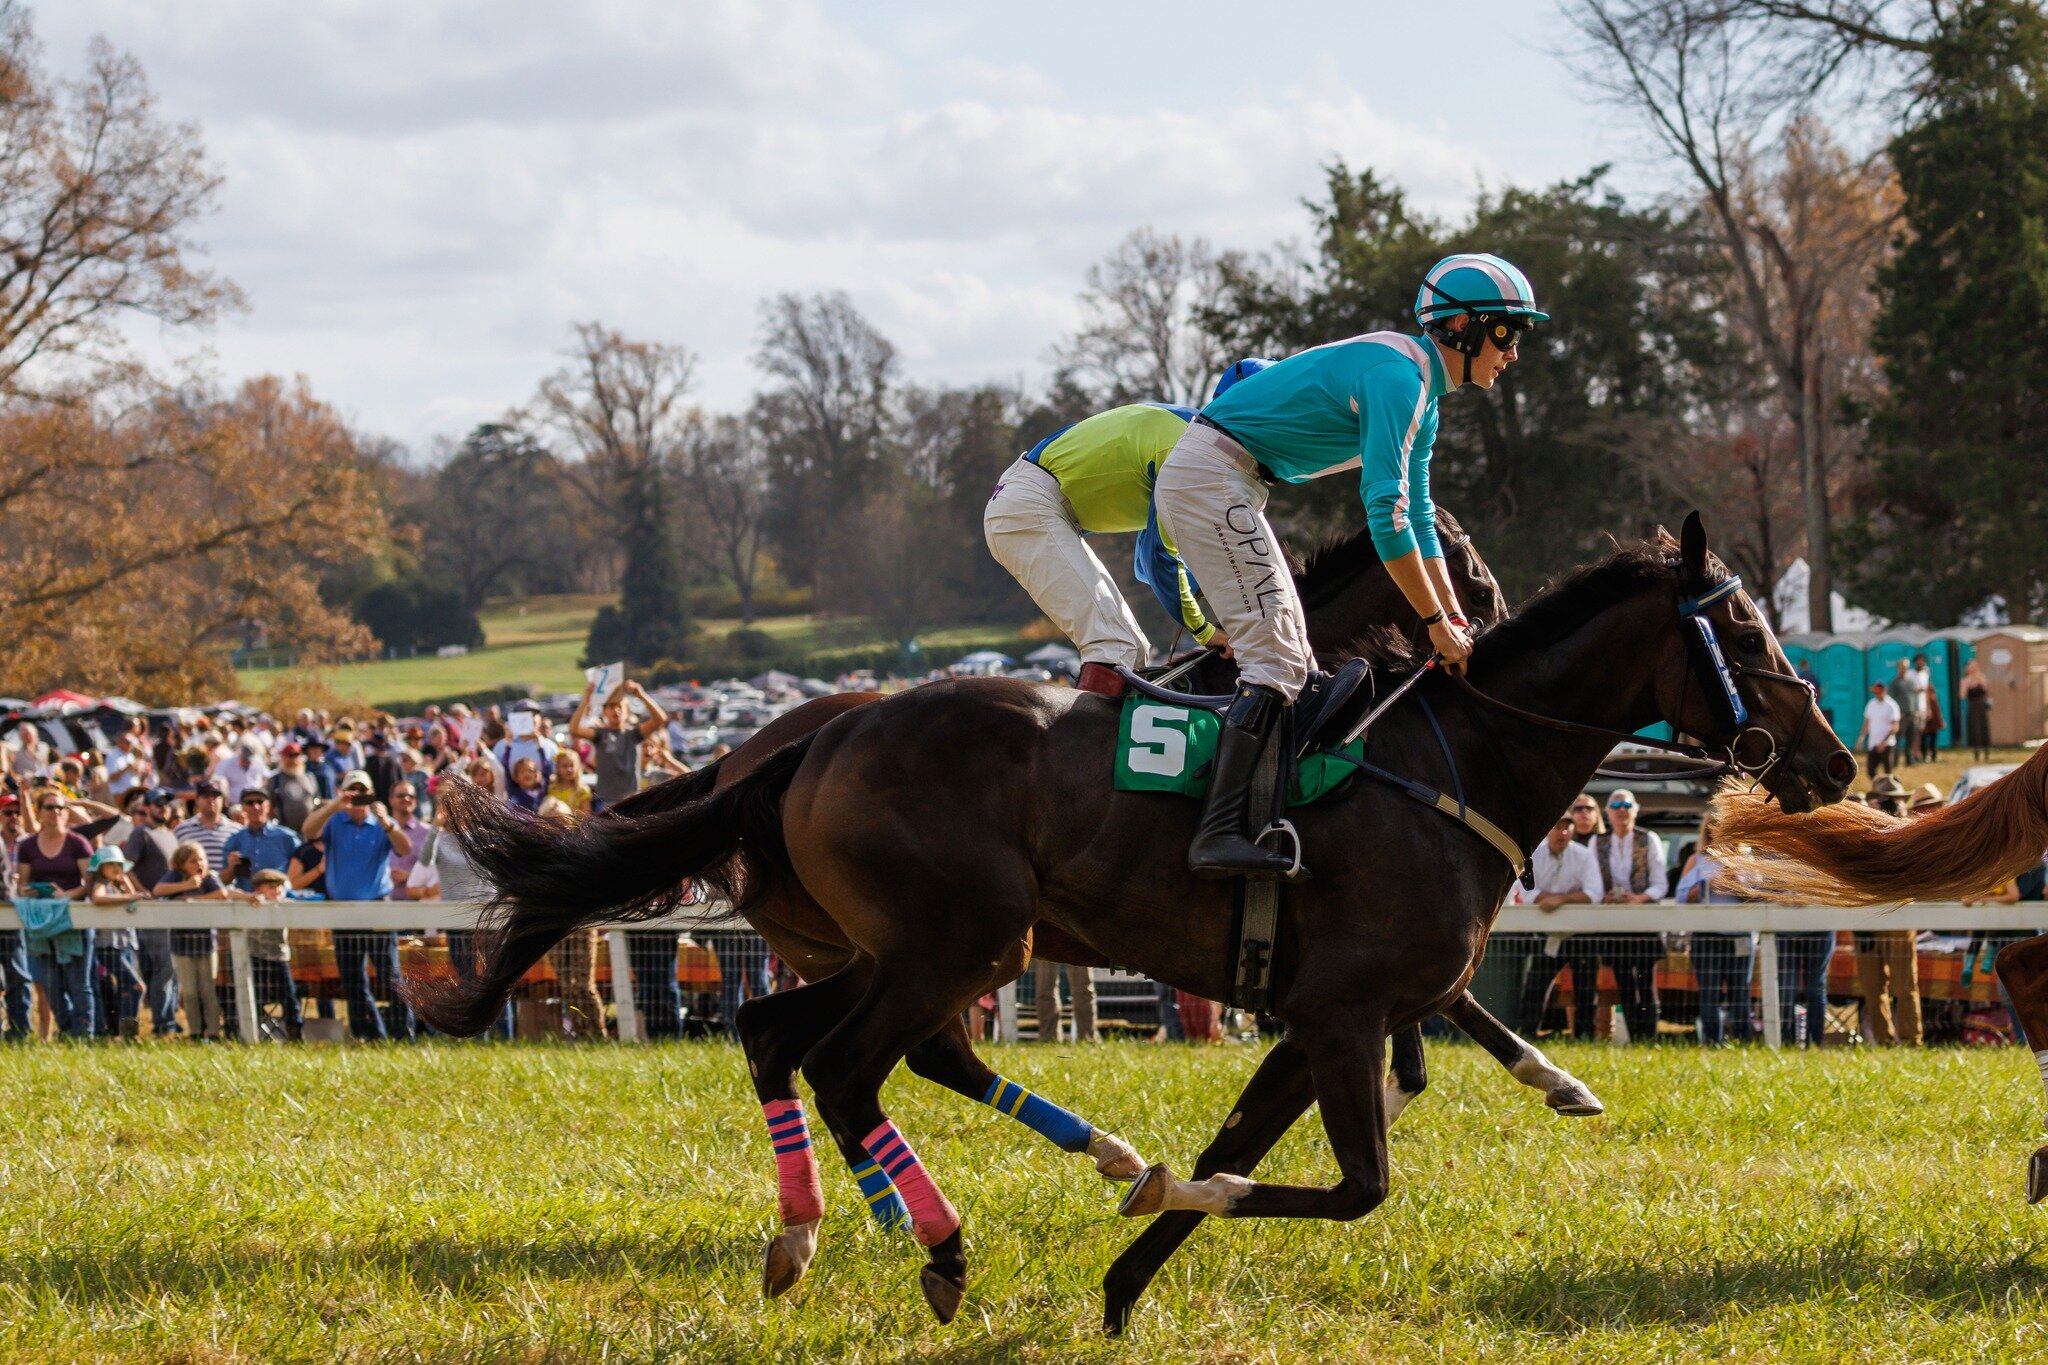 Tickets go on sale in 2 months! It&rsquo;s not too early to make your plans for this year&rsquo;s Montpelier Hunt Races! 🤩

Tickets will go on sale July 19th online at our website and in person at our ticket outlets. Act early to secure a reserved p